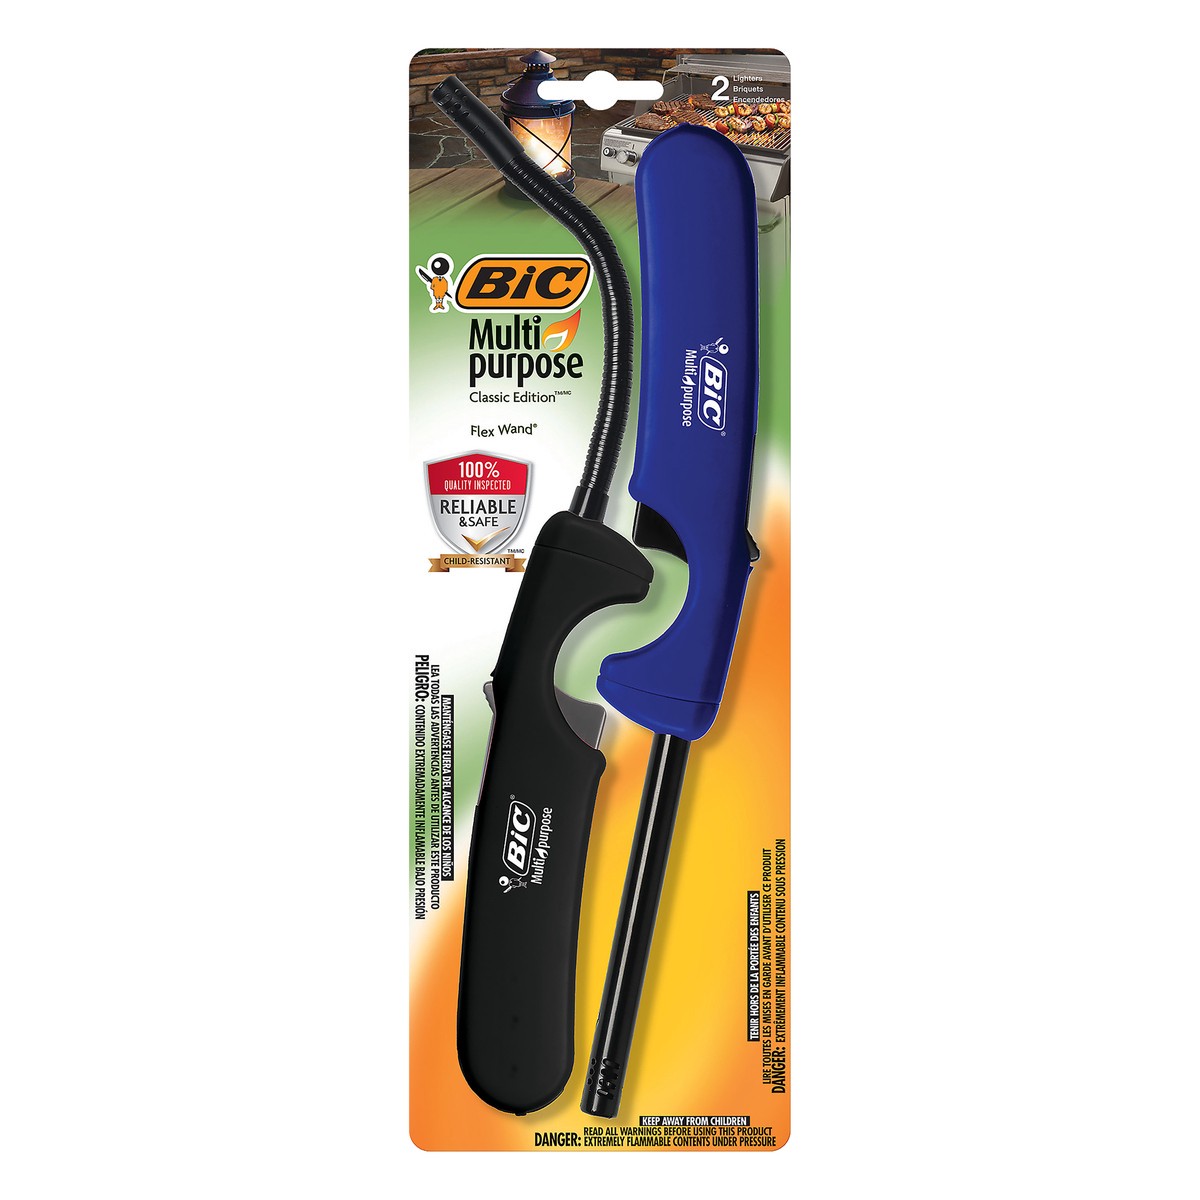 slide 1 of 3, Bic Multipurpose Classic Edition Lighter And Flex Wand Lighter, 2 ct